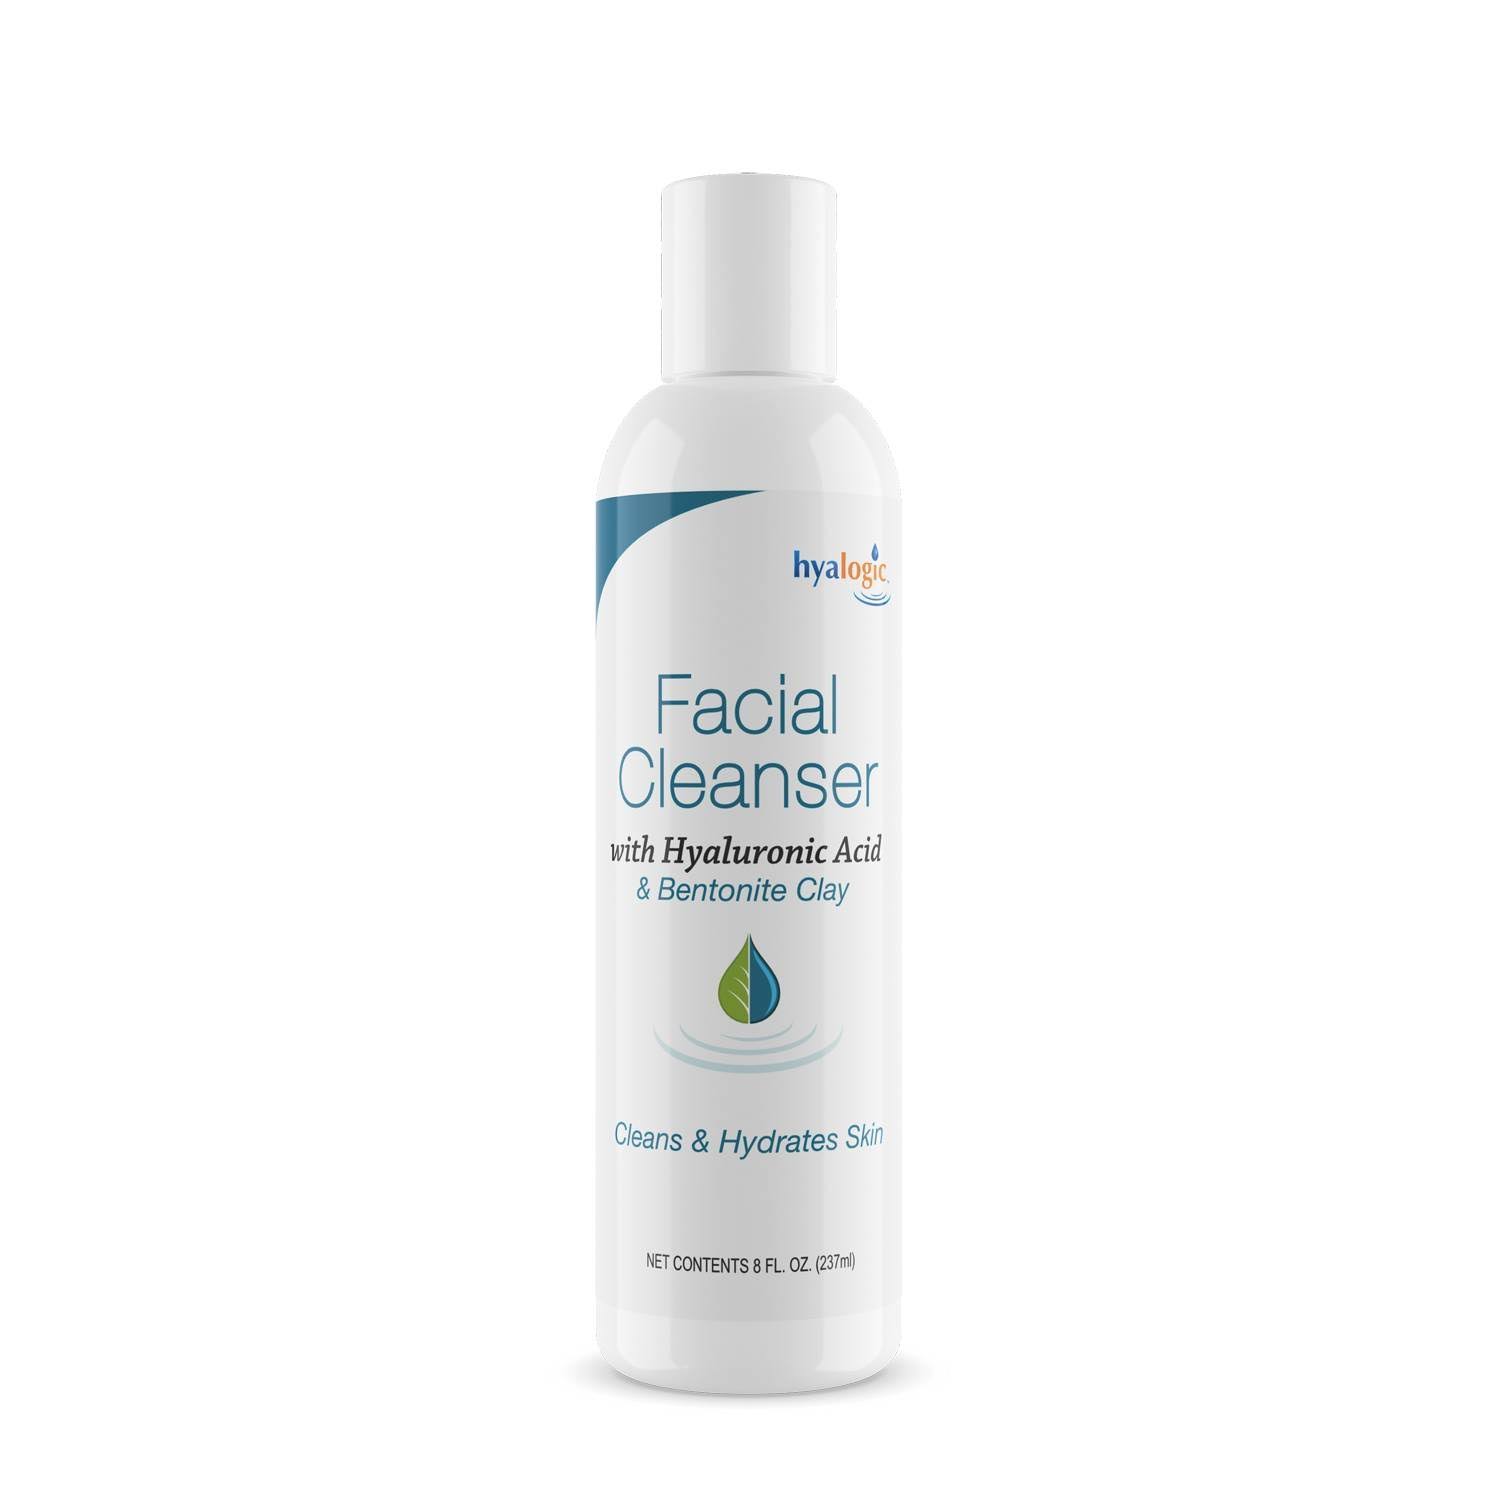 Hyalogic Facial Cleanser with Hyaluronic Acid